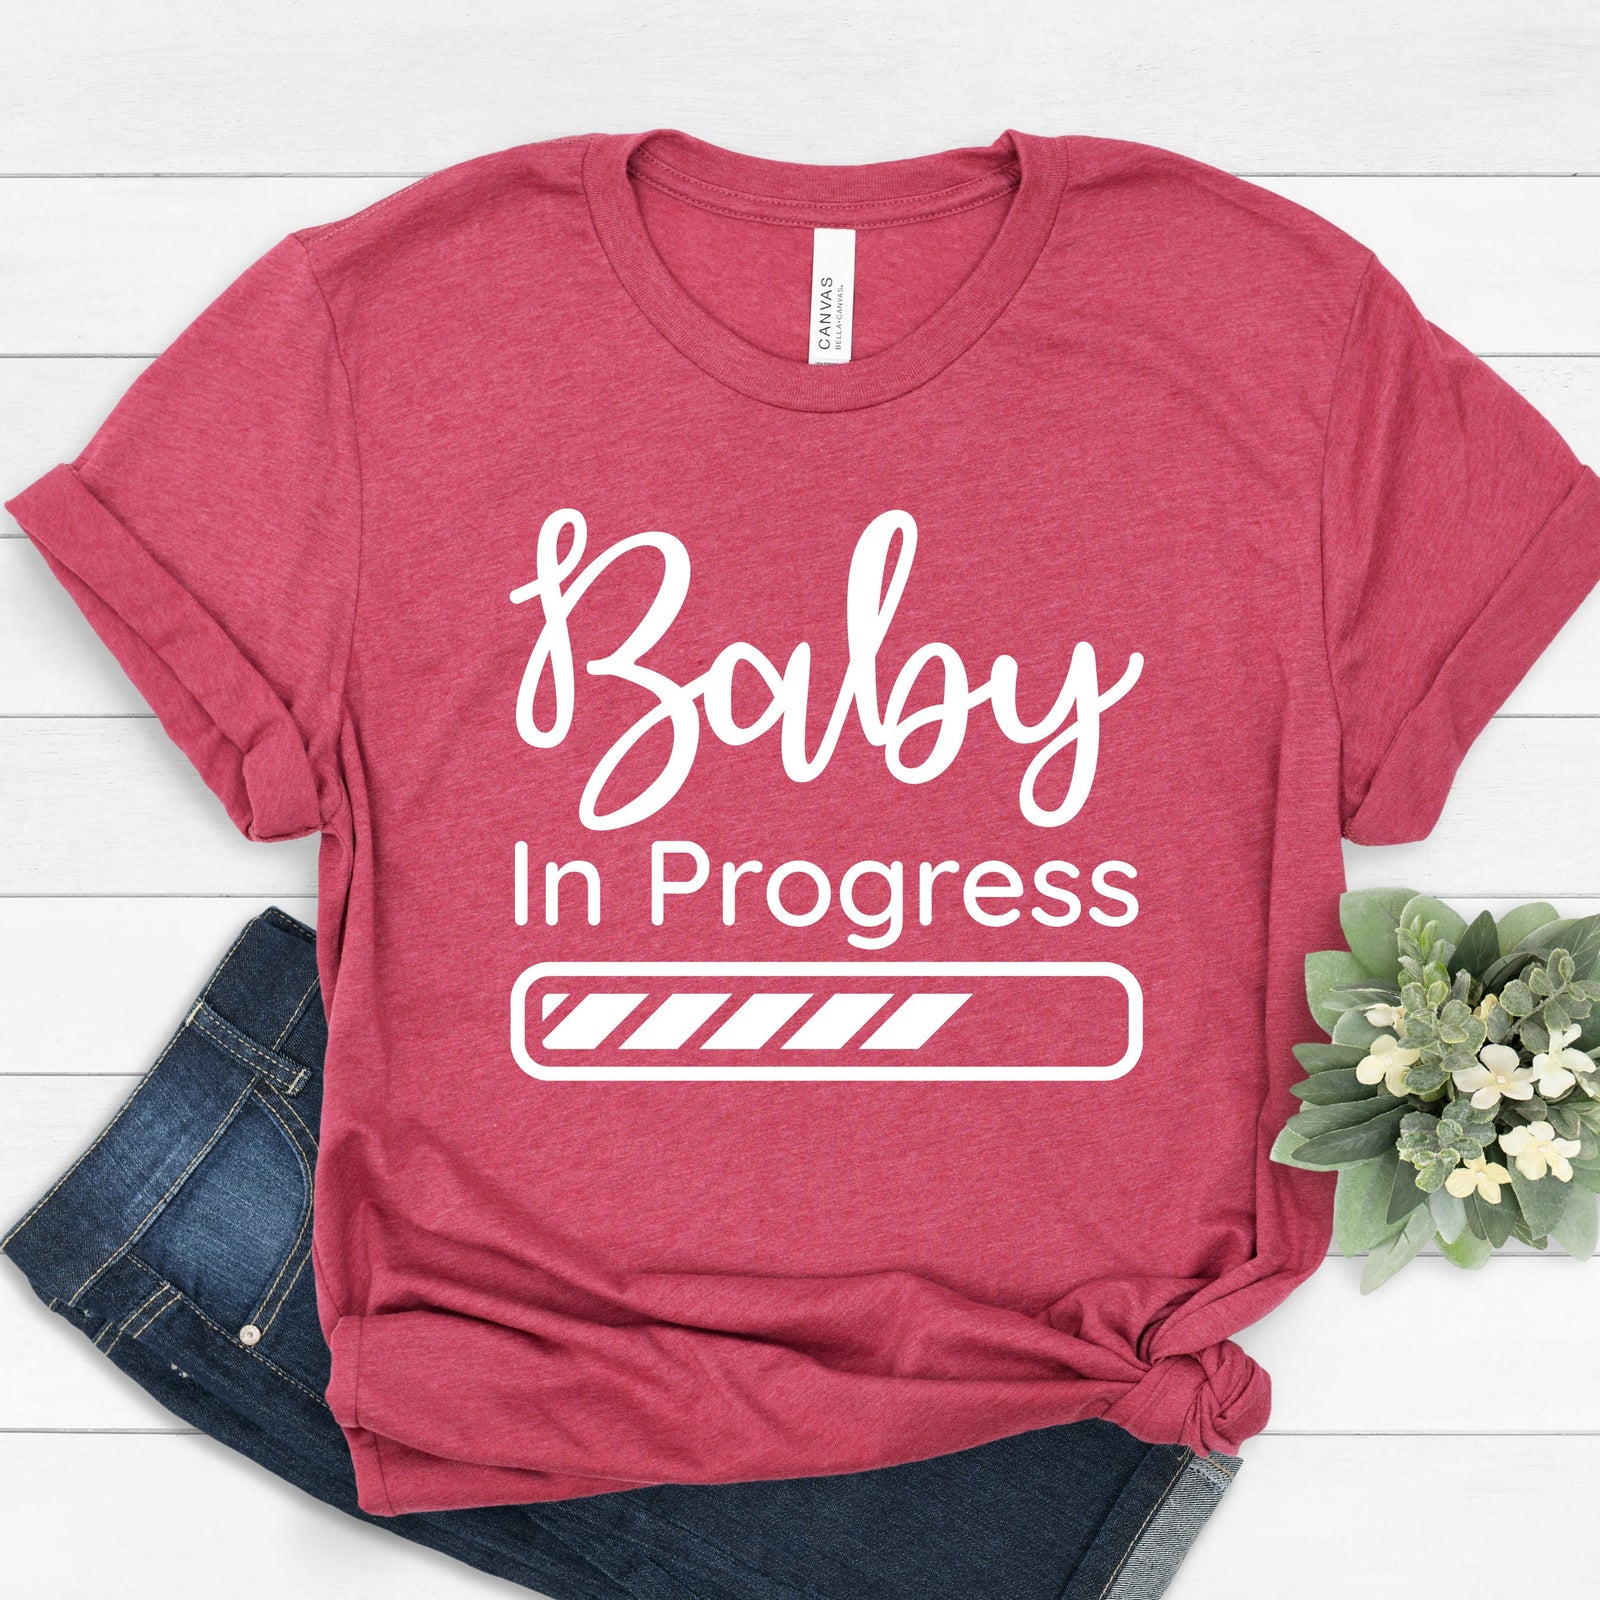 Baby in Progress T Shirt - Funny Pregnancy Announcement T Shirt - Mommy to be Shirt- Maternity Baby Reveal Shirt